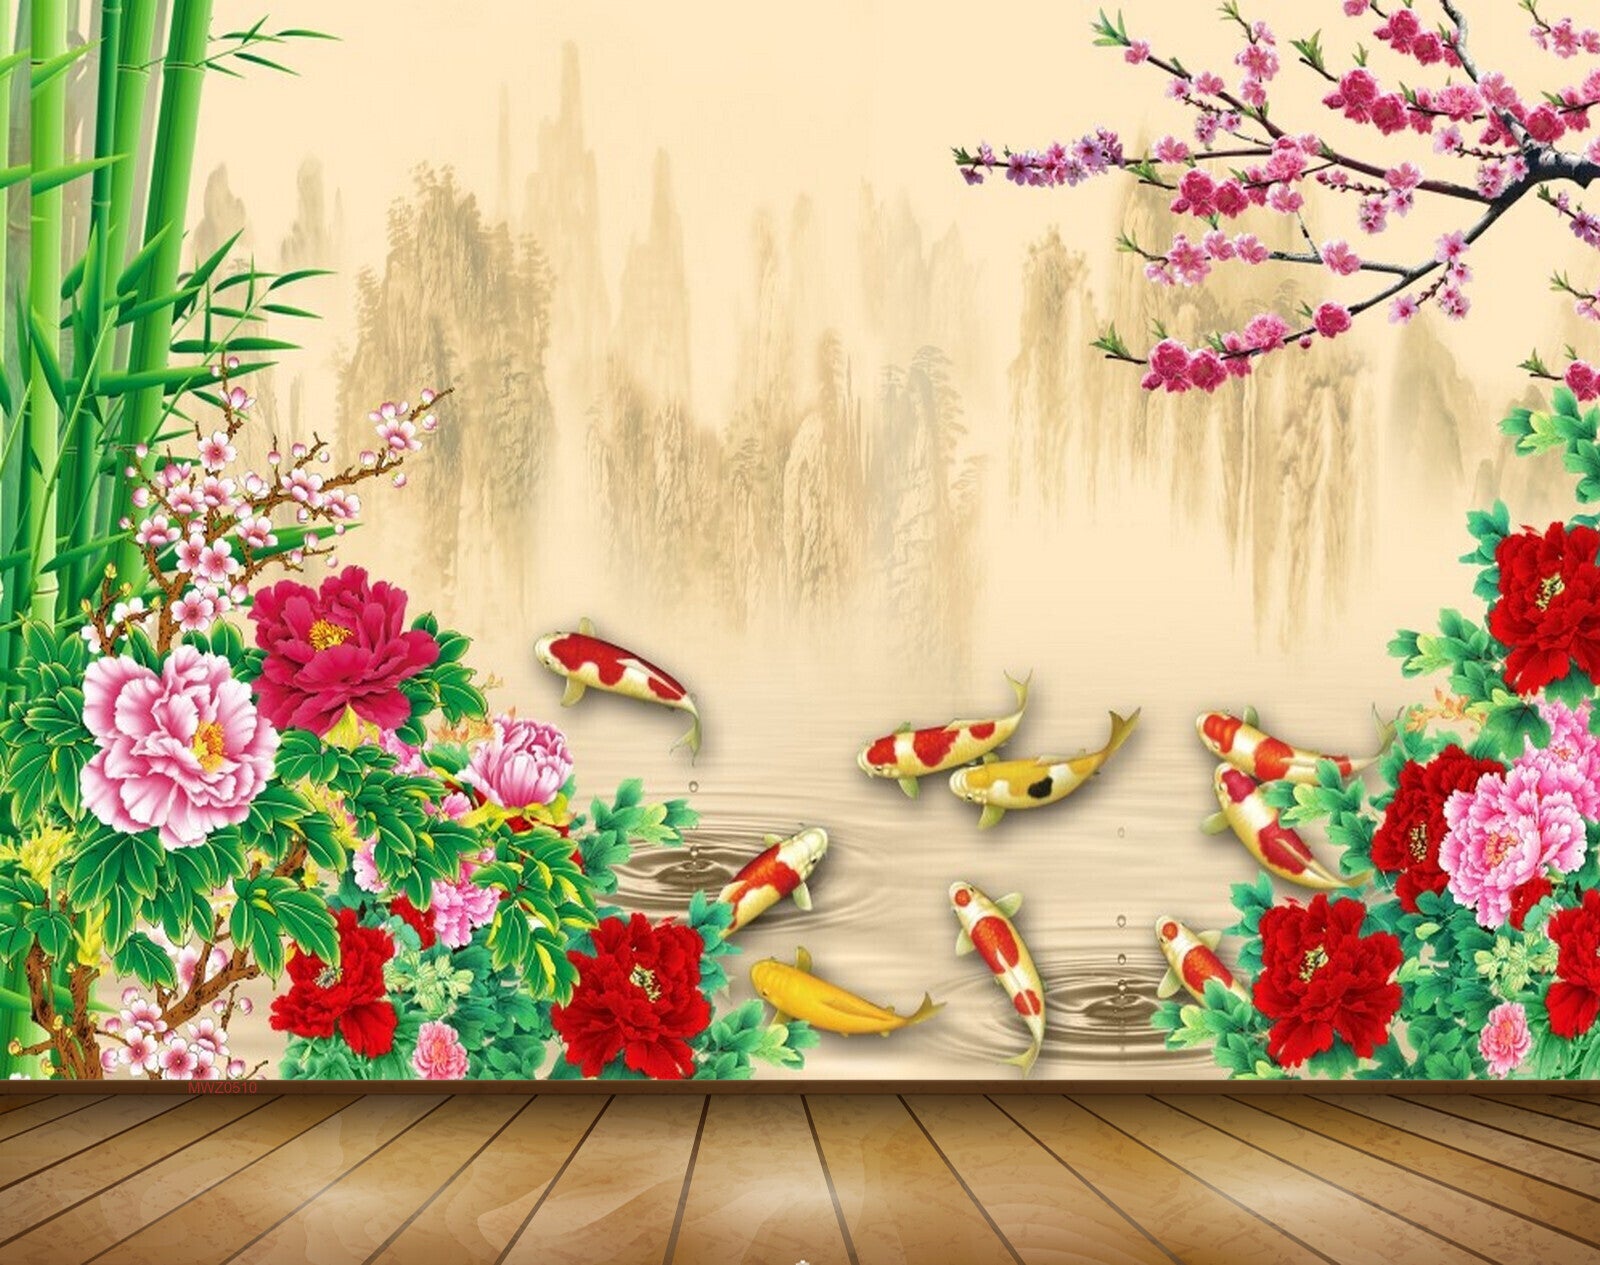 Avikalp MWZ0510 Pink Red White Flowers Fishes Plants 3D HD Wallpaper